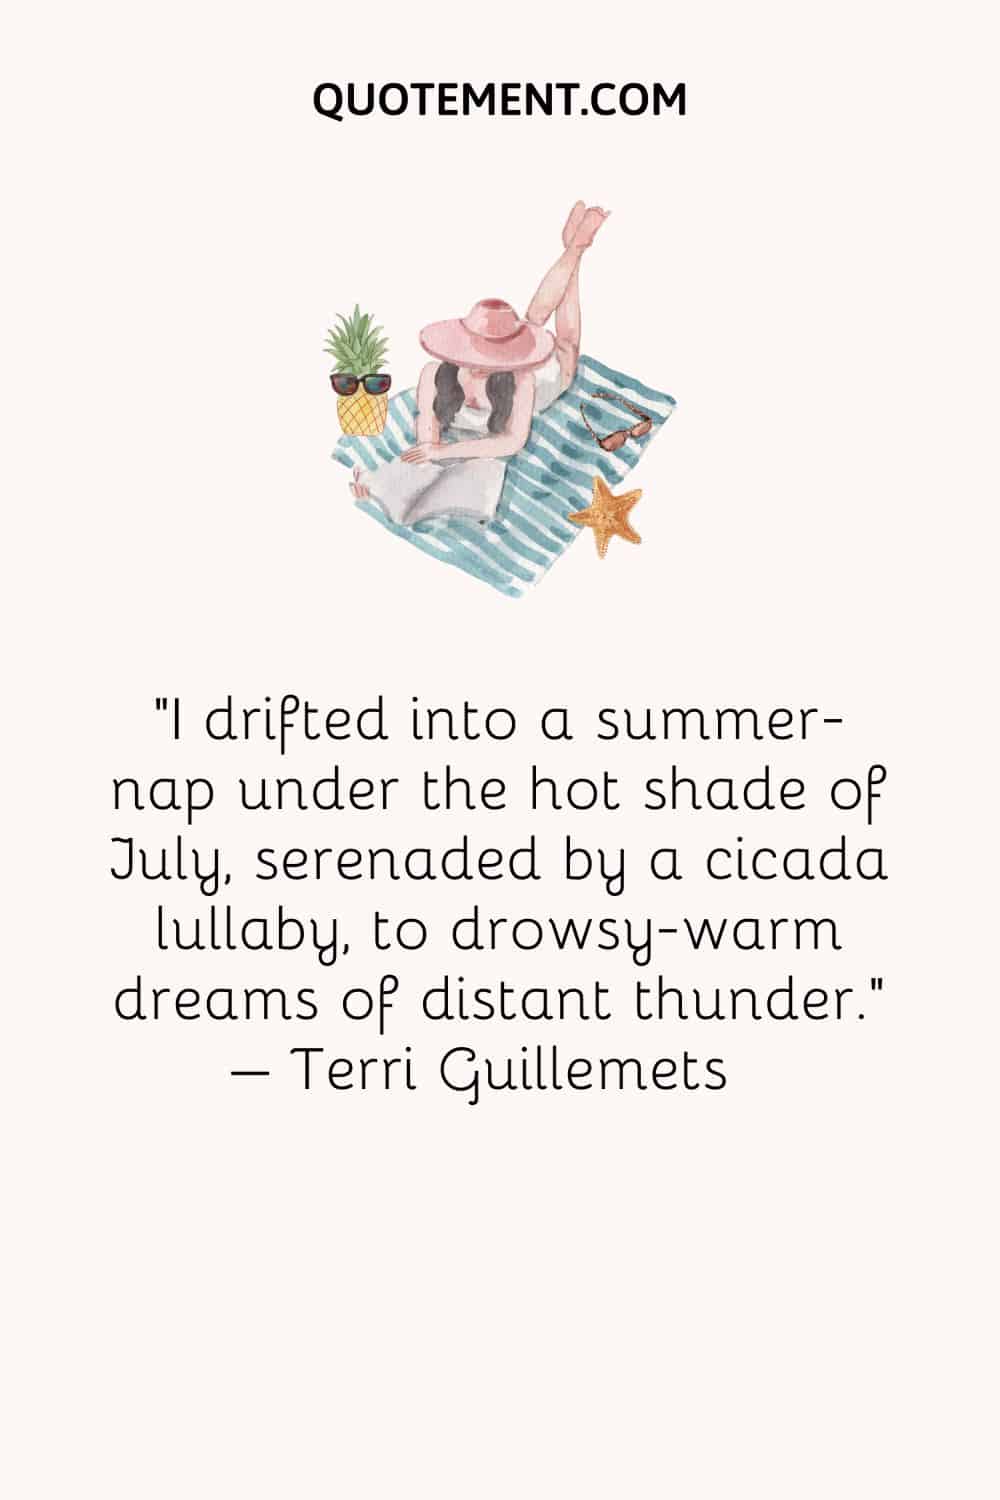 I drifted into a summer-nap under the hot shade of July, serenaded by a cicada lullaby, to drowsy-warm dreams of distant thunder. – Terri Guillemets